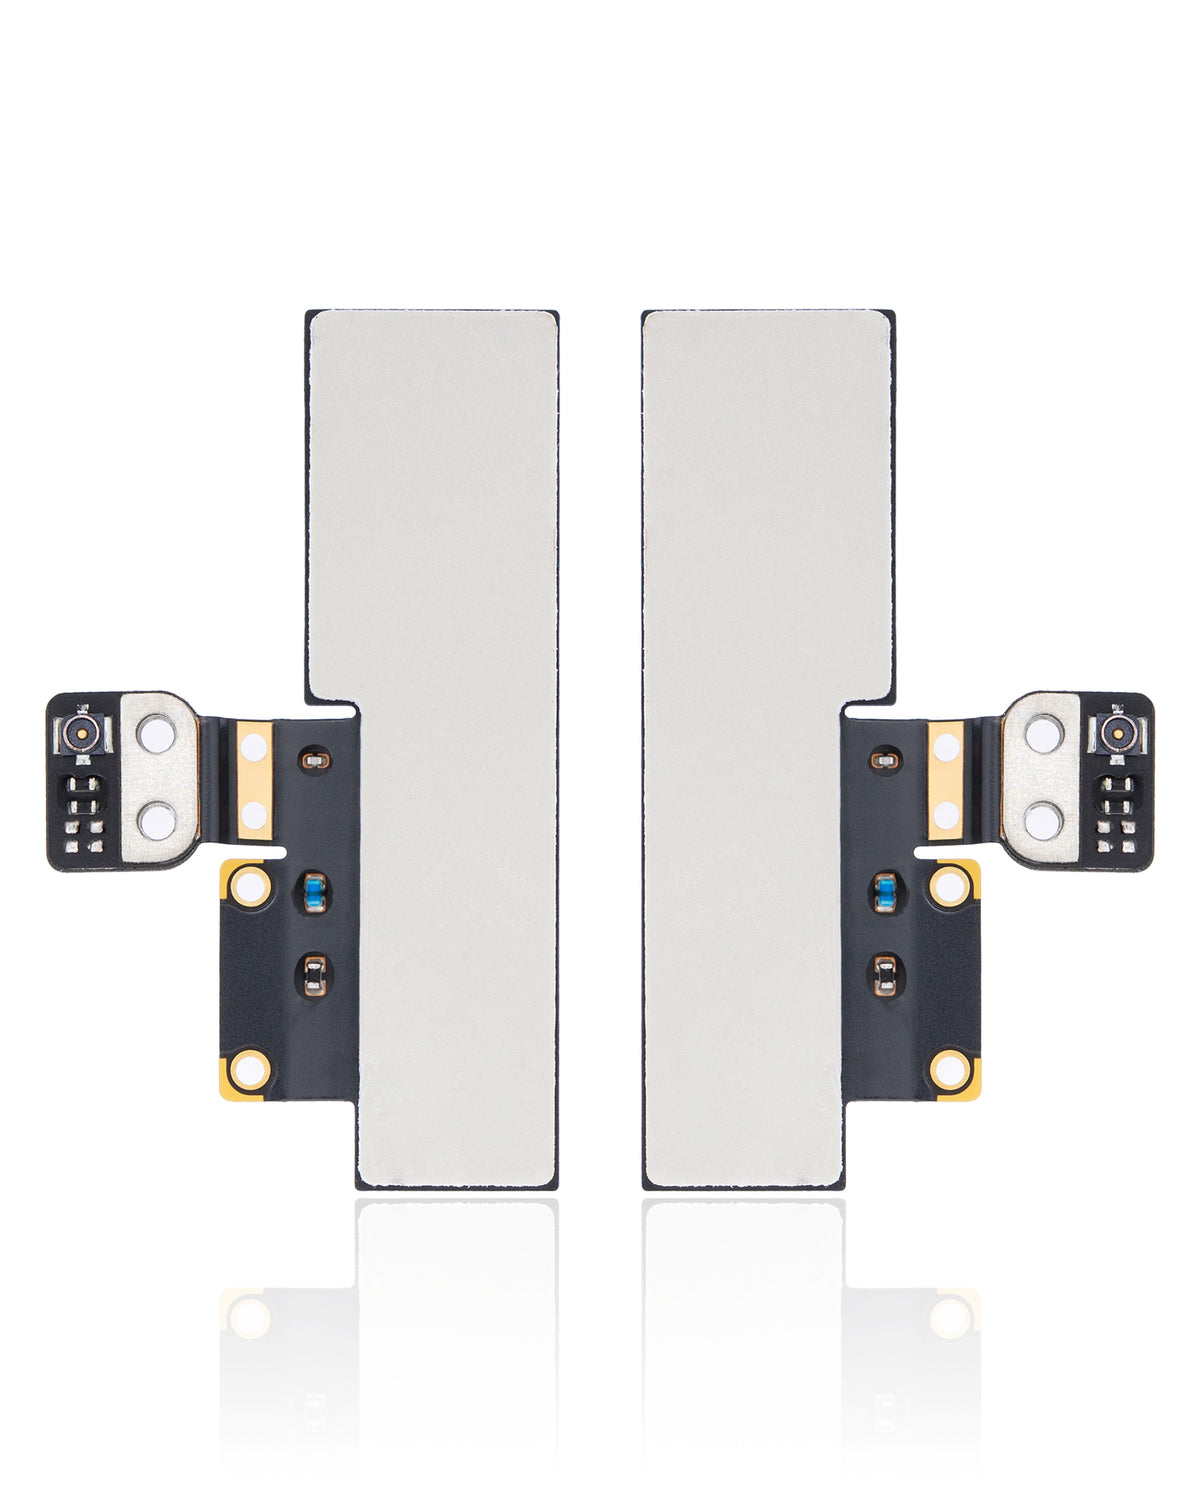 LEFT & RIGHT ANTENNA FLEX CABLE (2 PIECE SET) COMPATIBLE WITH IPAD PRO 9.7" (4G VERSION)